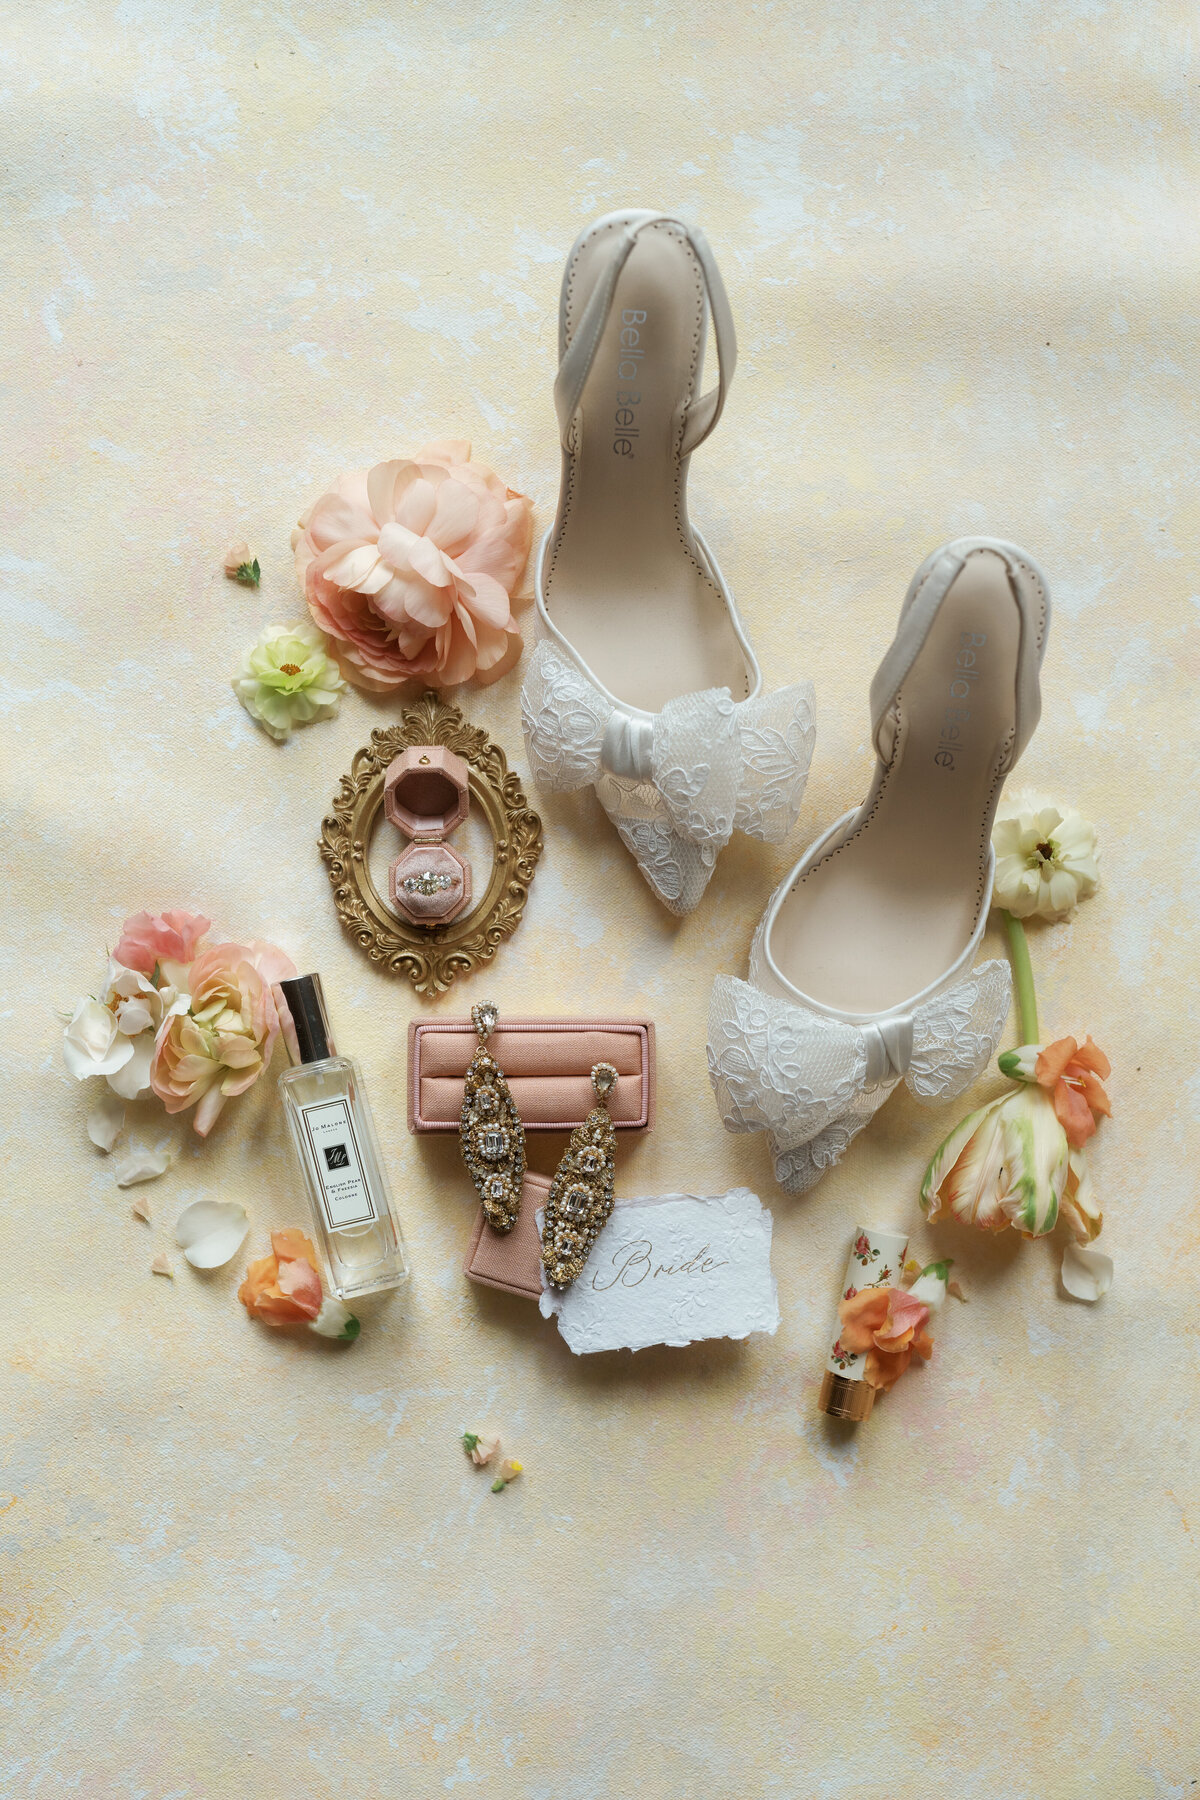 Flat lay of wedding details including shoes, perfumes and jewelry.